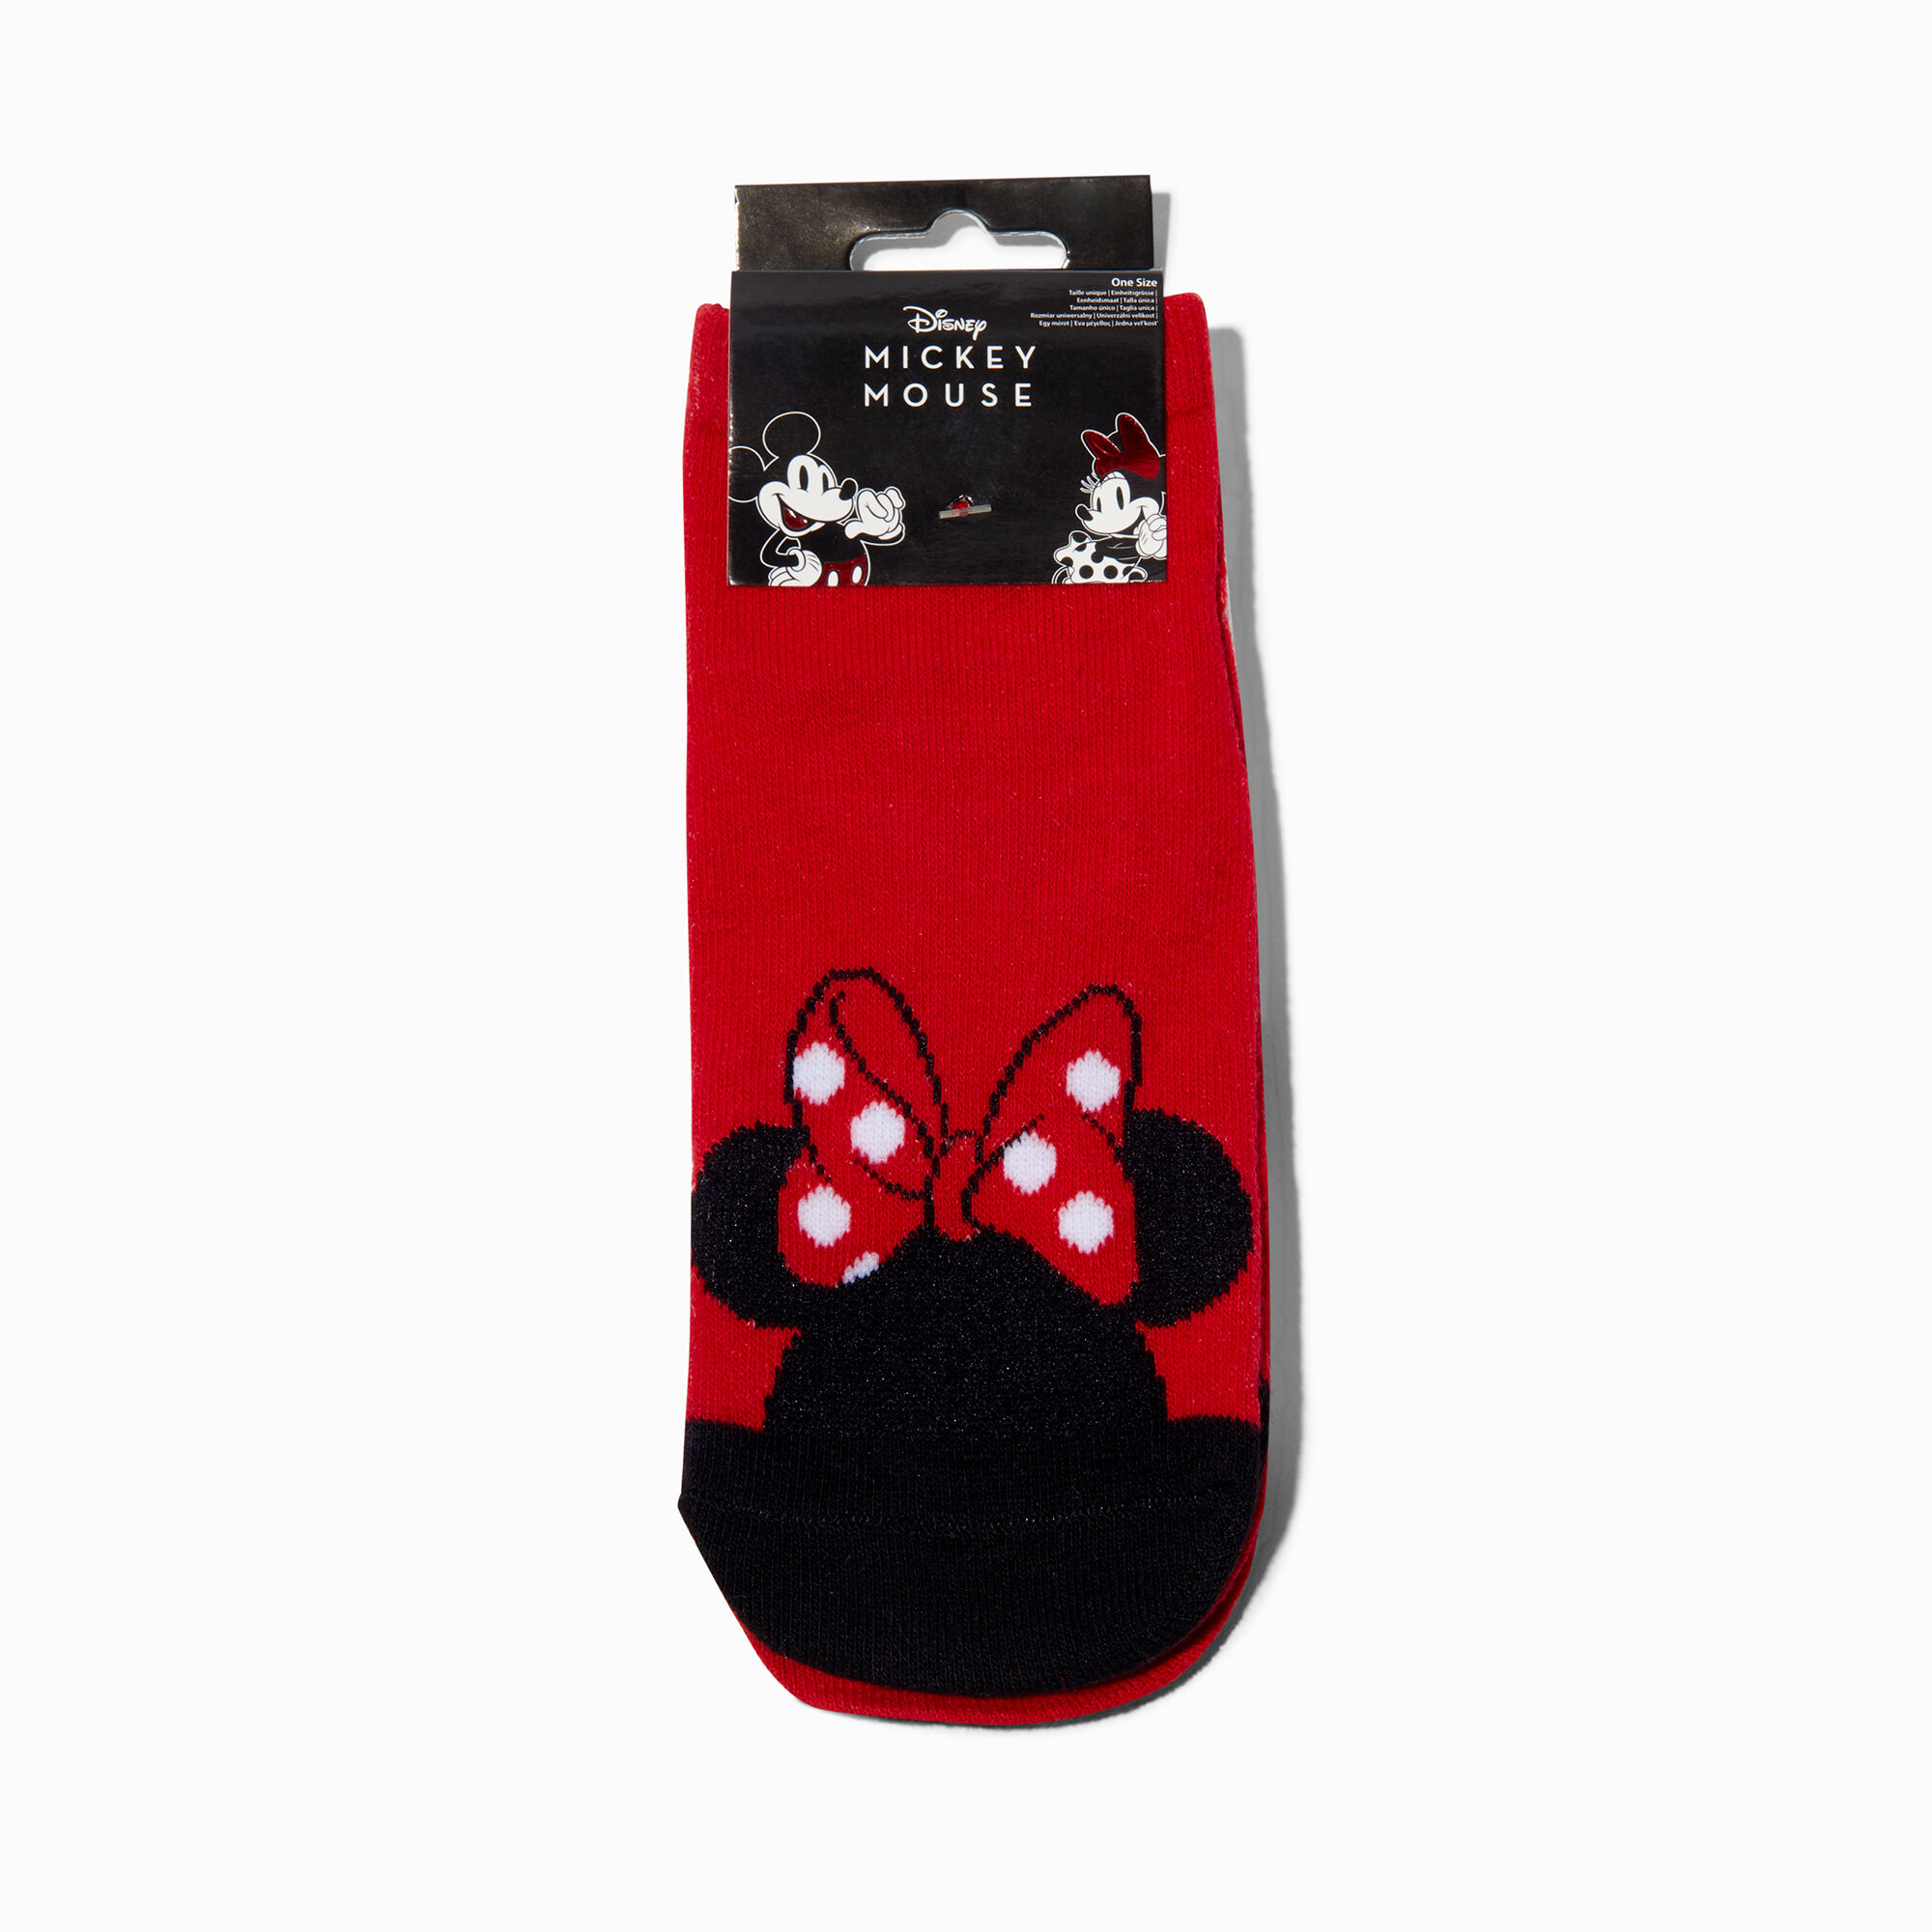 View Claires Disney 100 Mickey Mouse Socks 2 Pack information